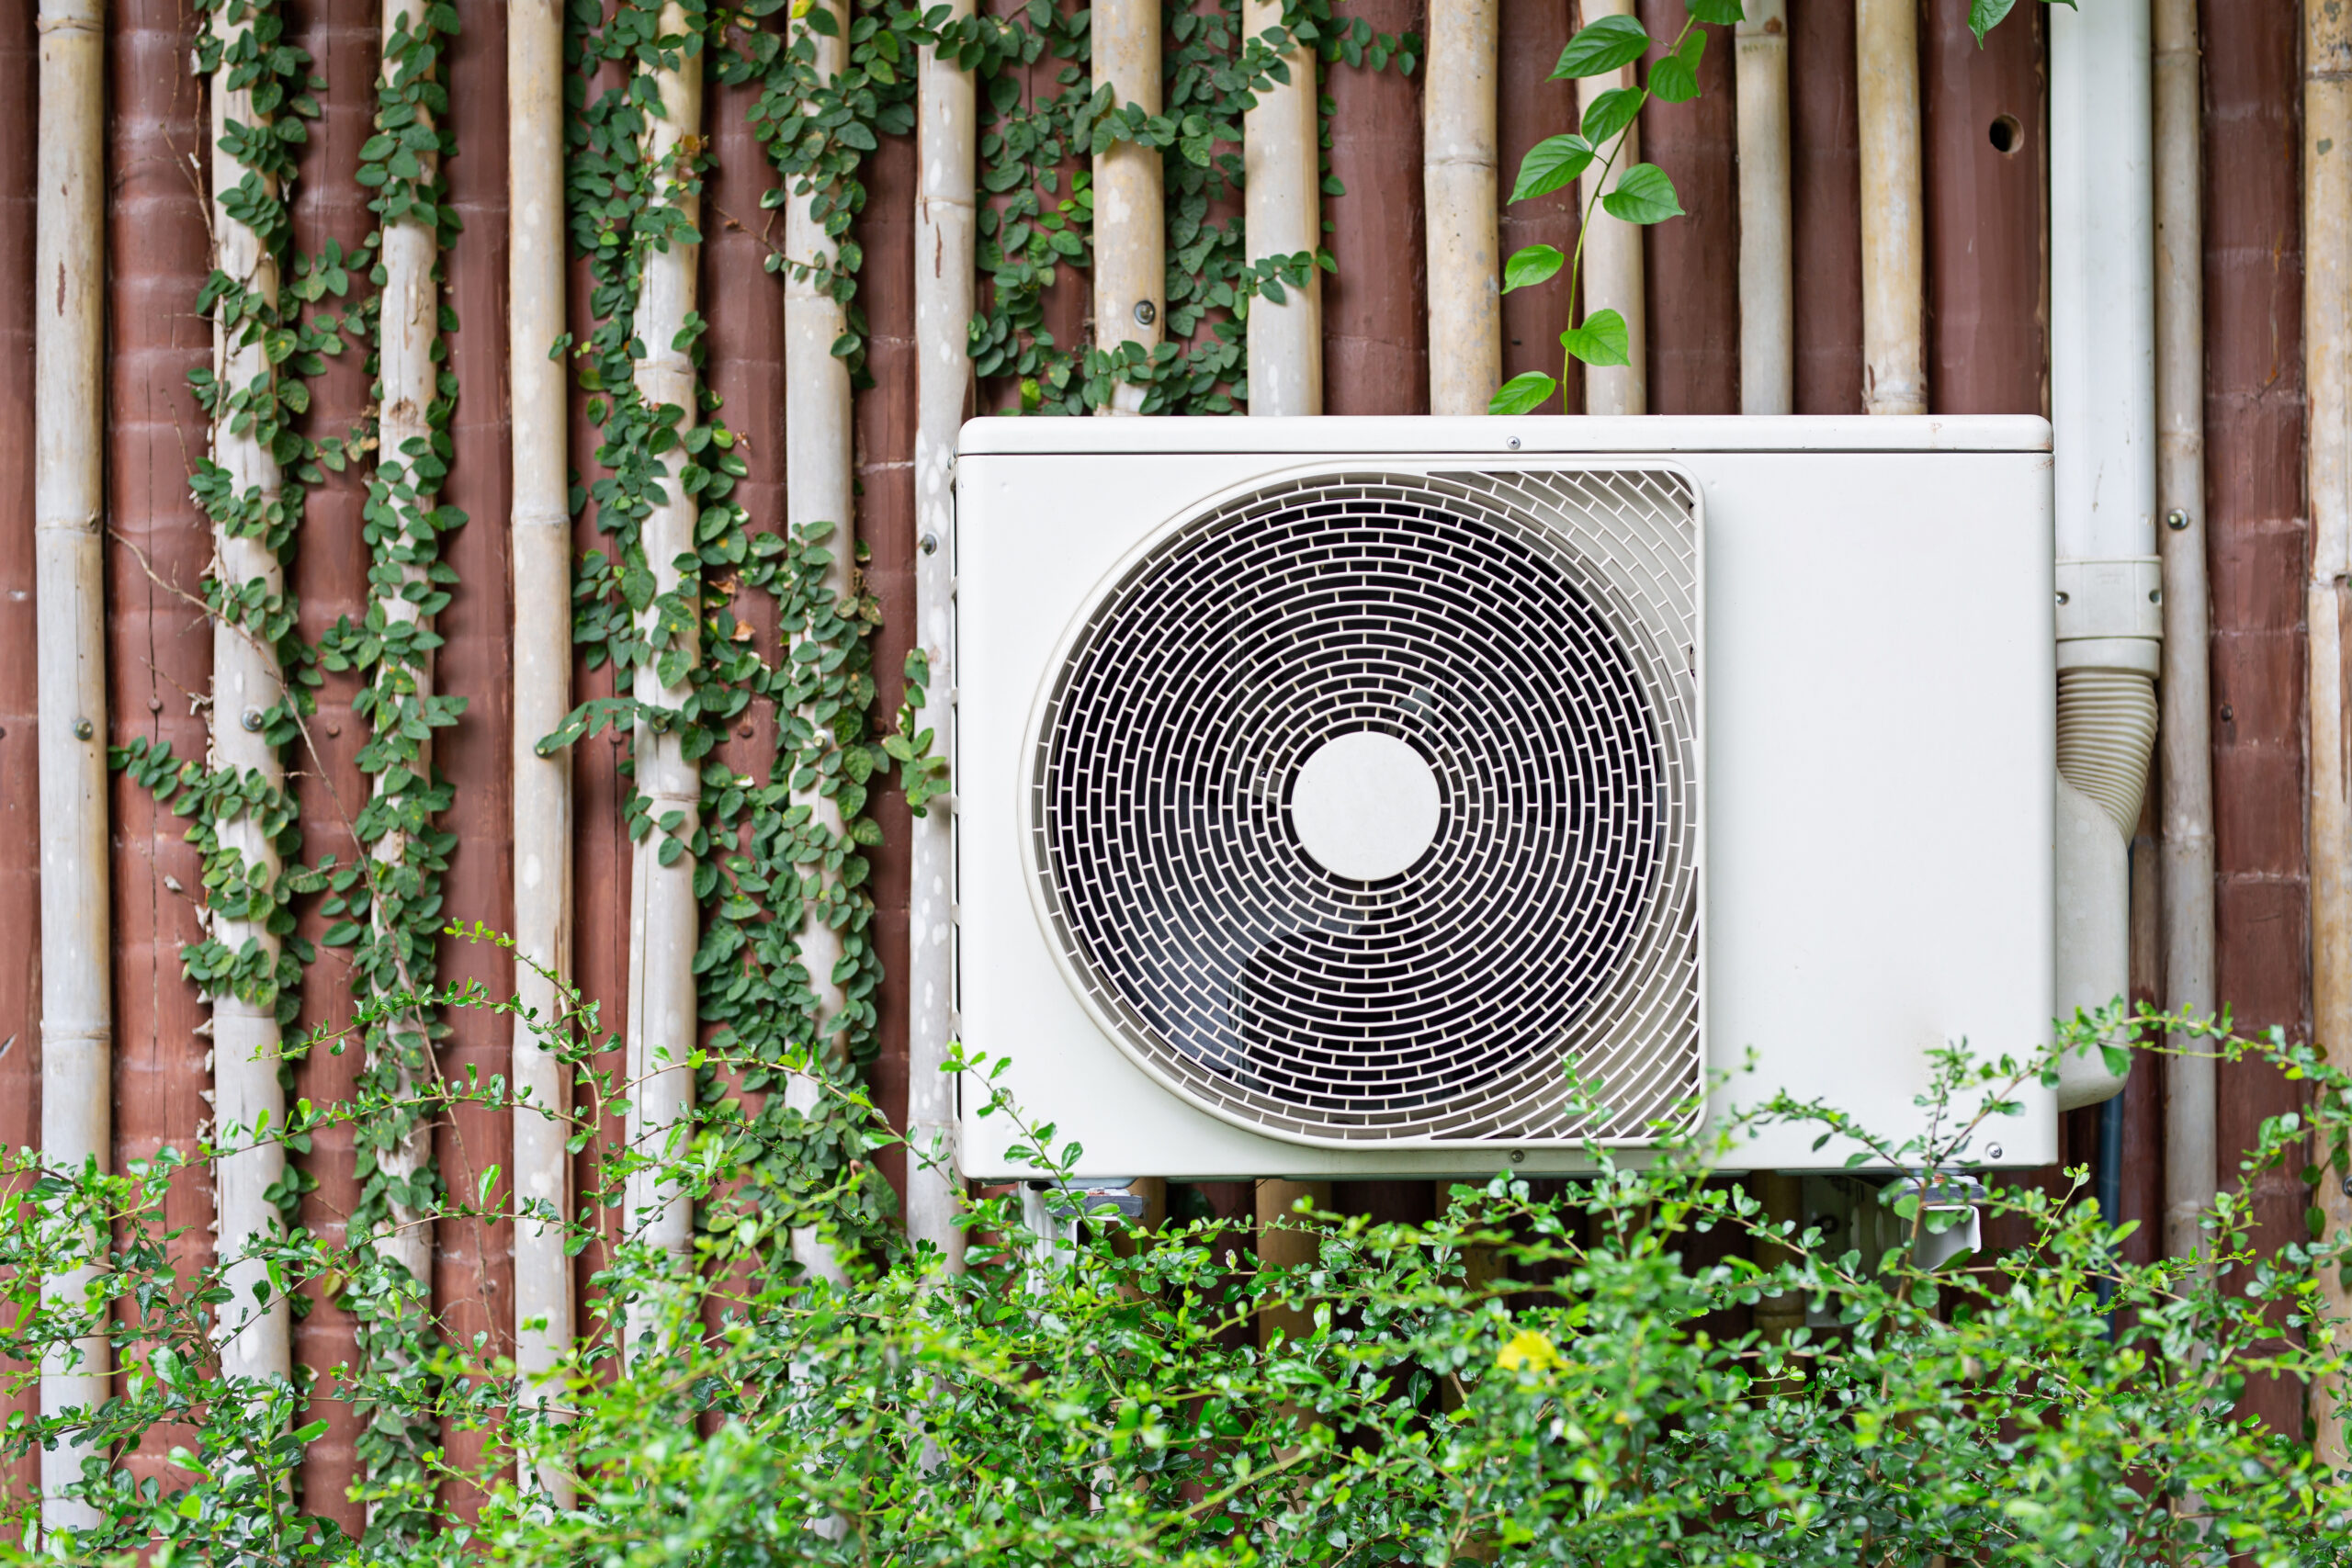 The air conditioner is mounted on the wall with the trees of the building with the garden in the front row.